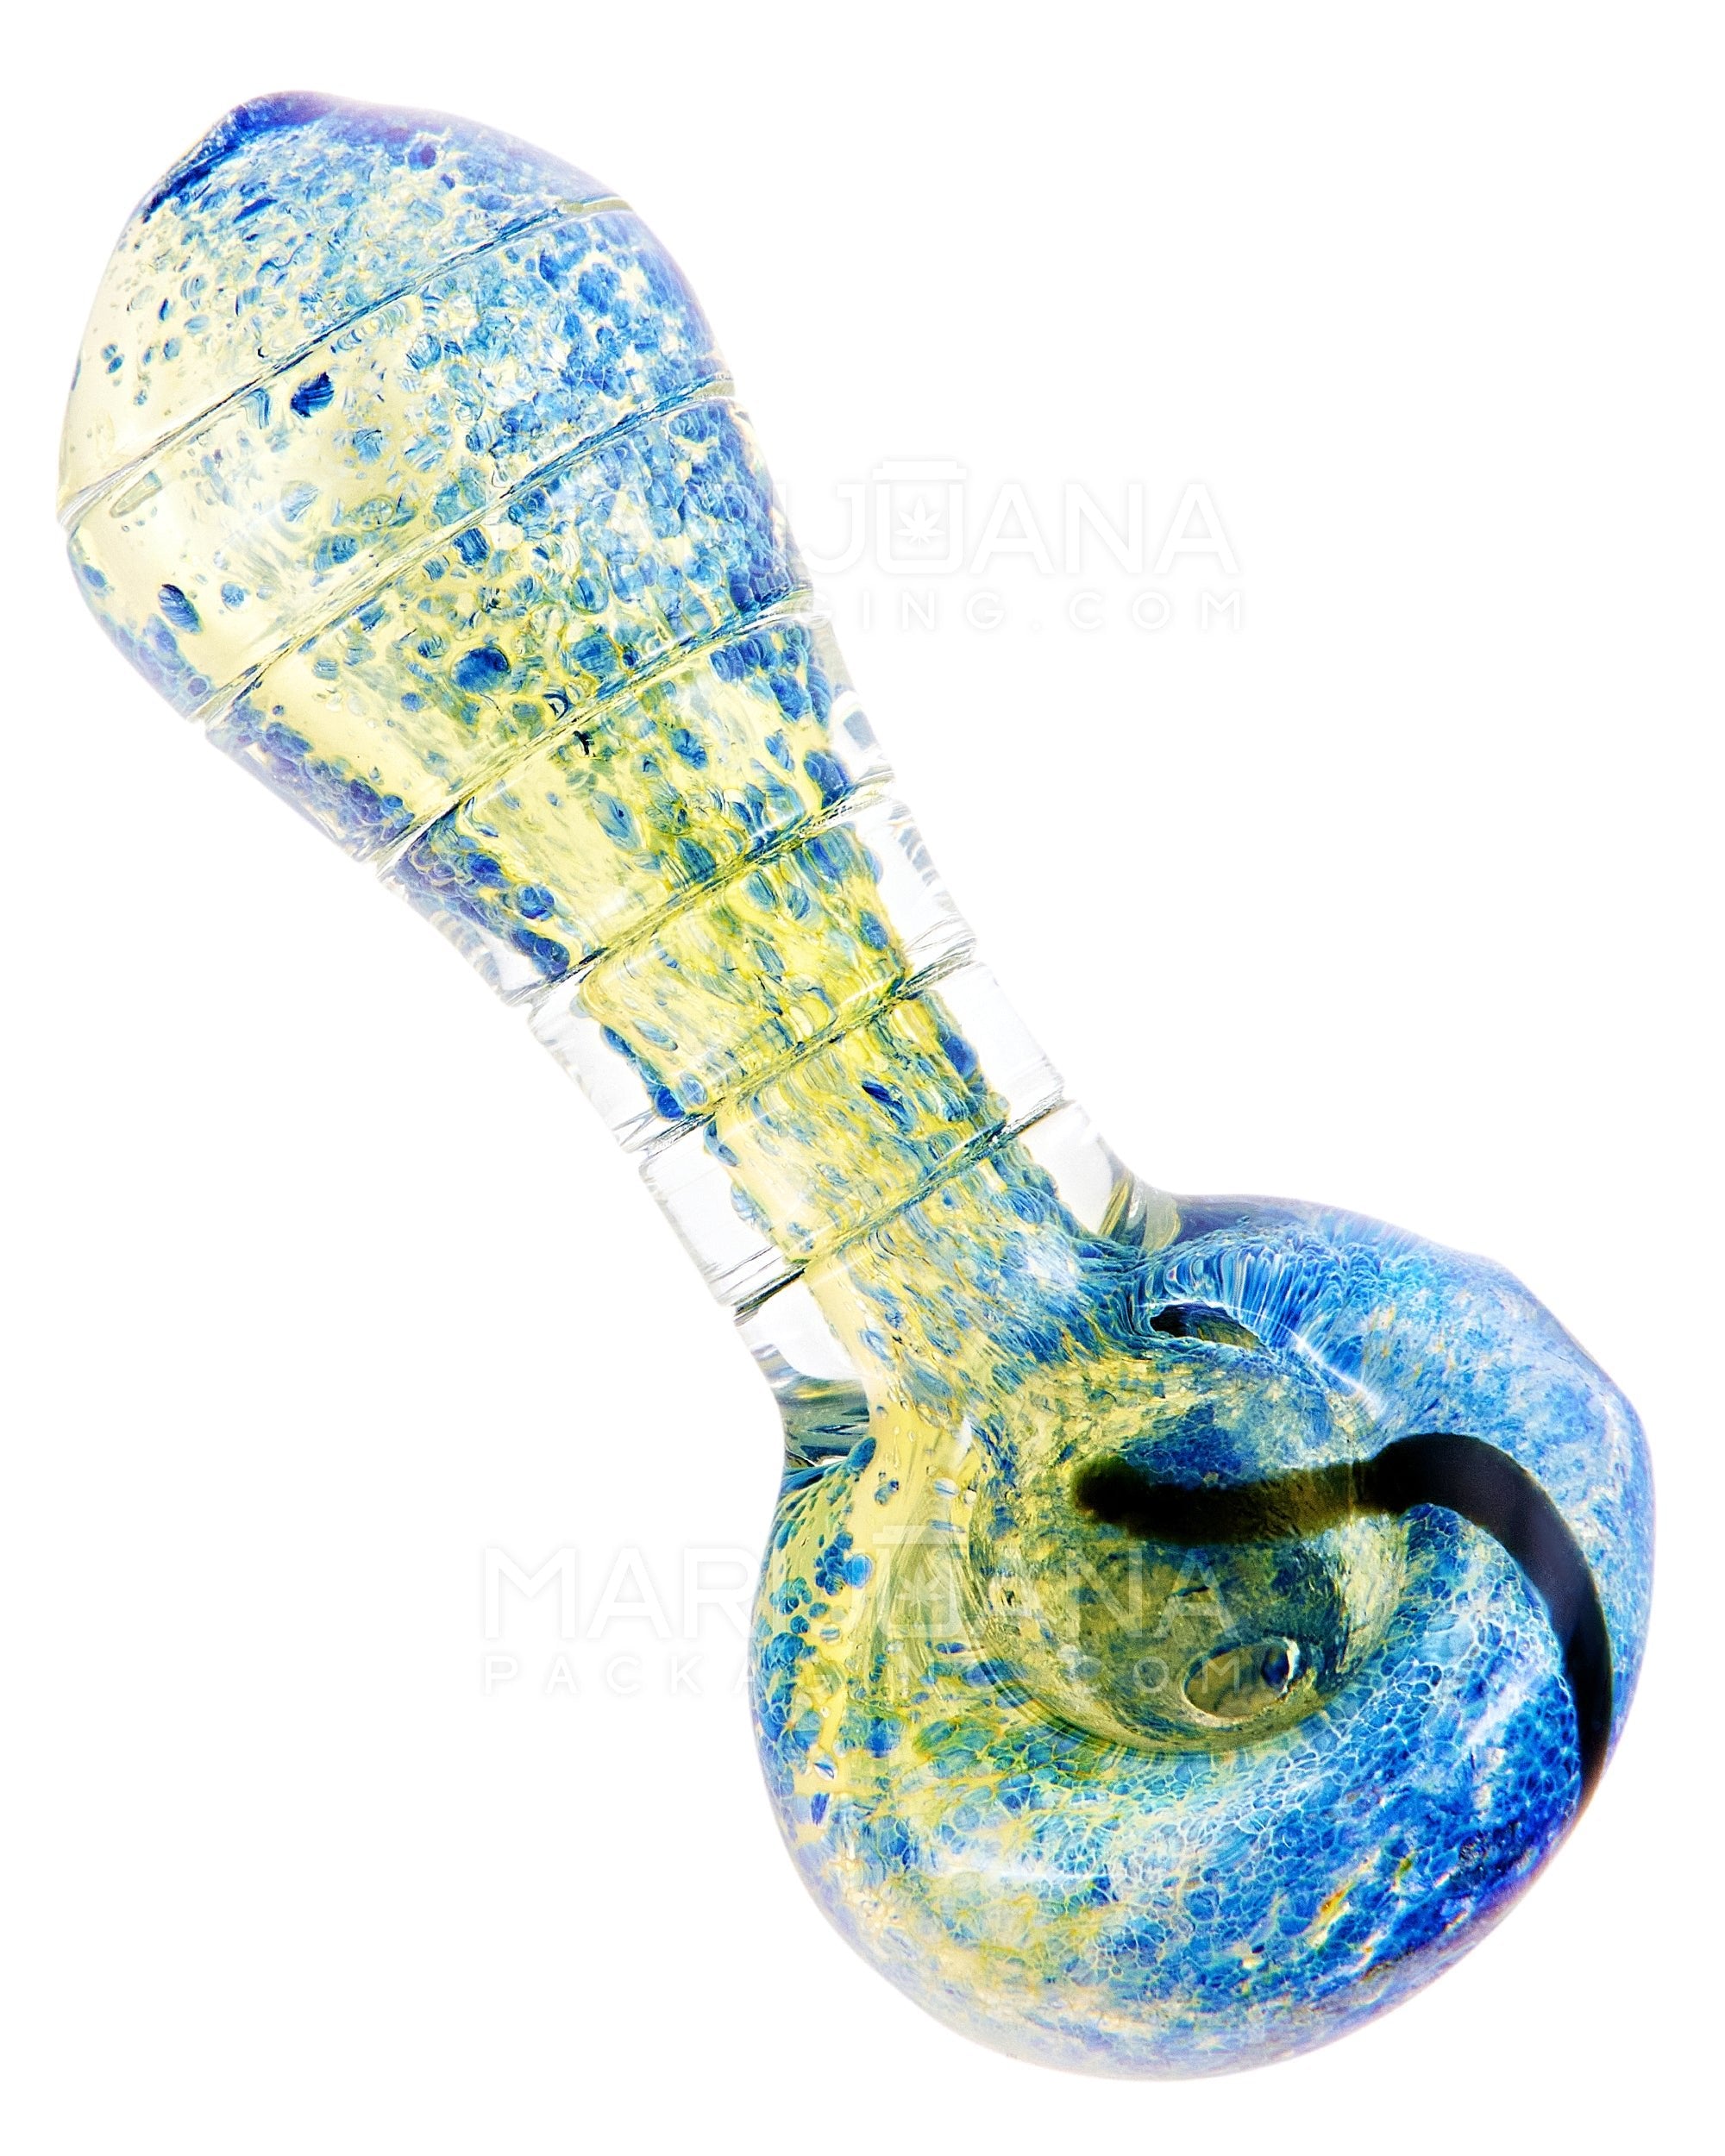 Frit & Gold Fumed Ridged Spoon Hand Pipe w/ Stripes | 3.5in Long - Glass - Assorted - 1